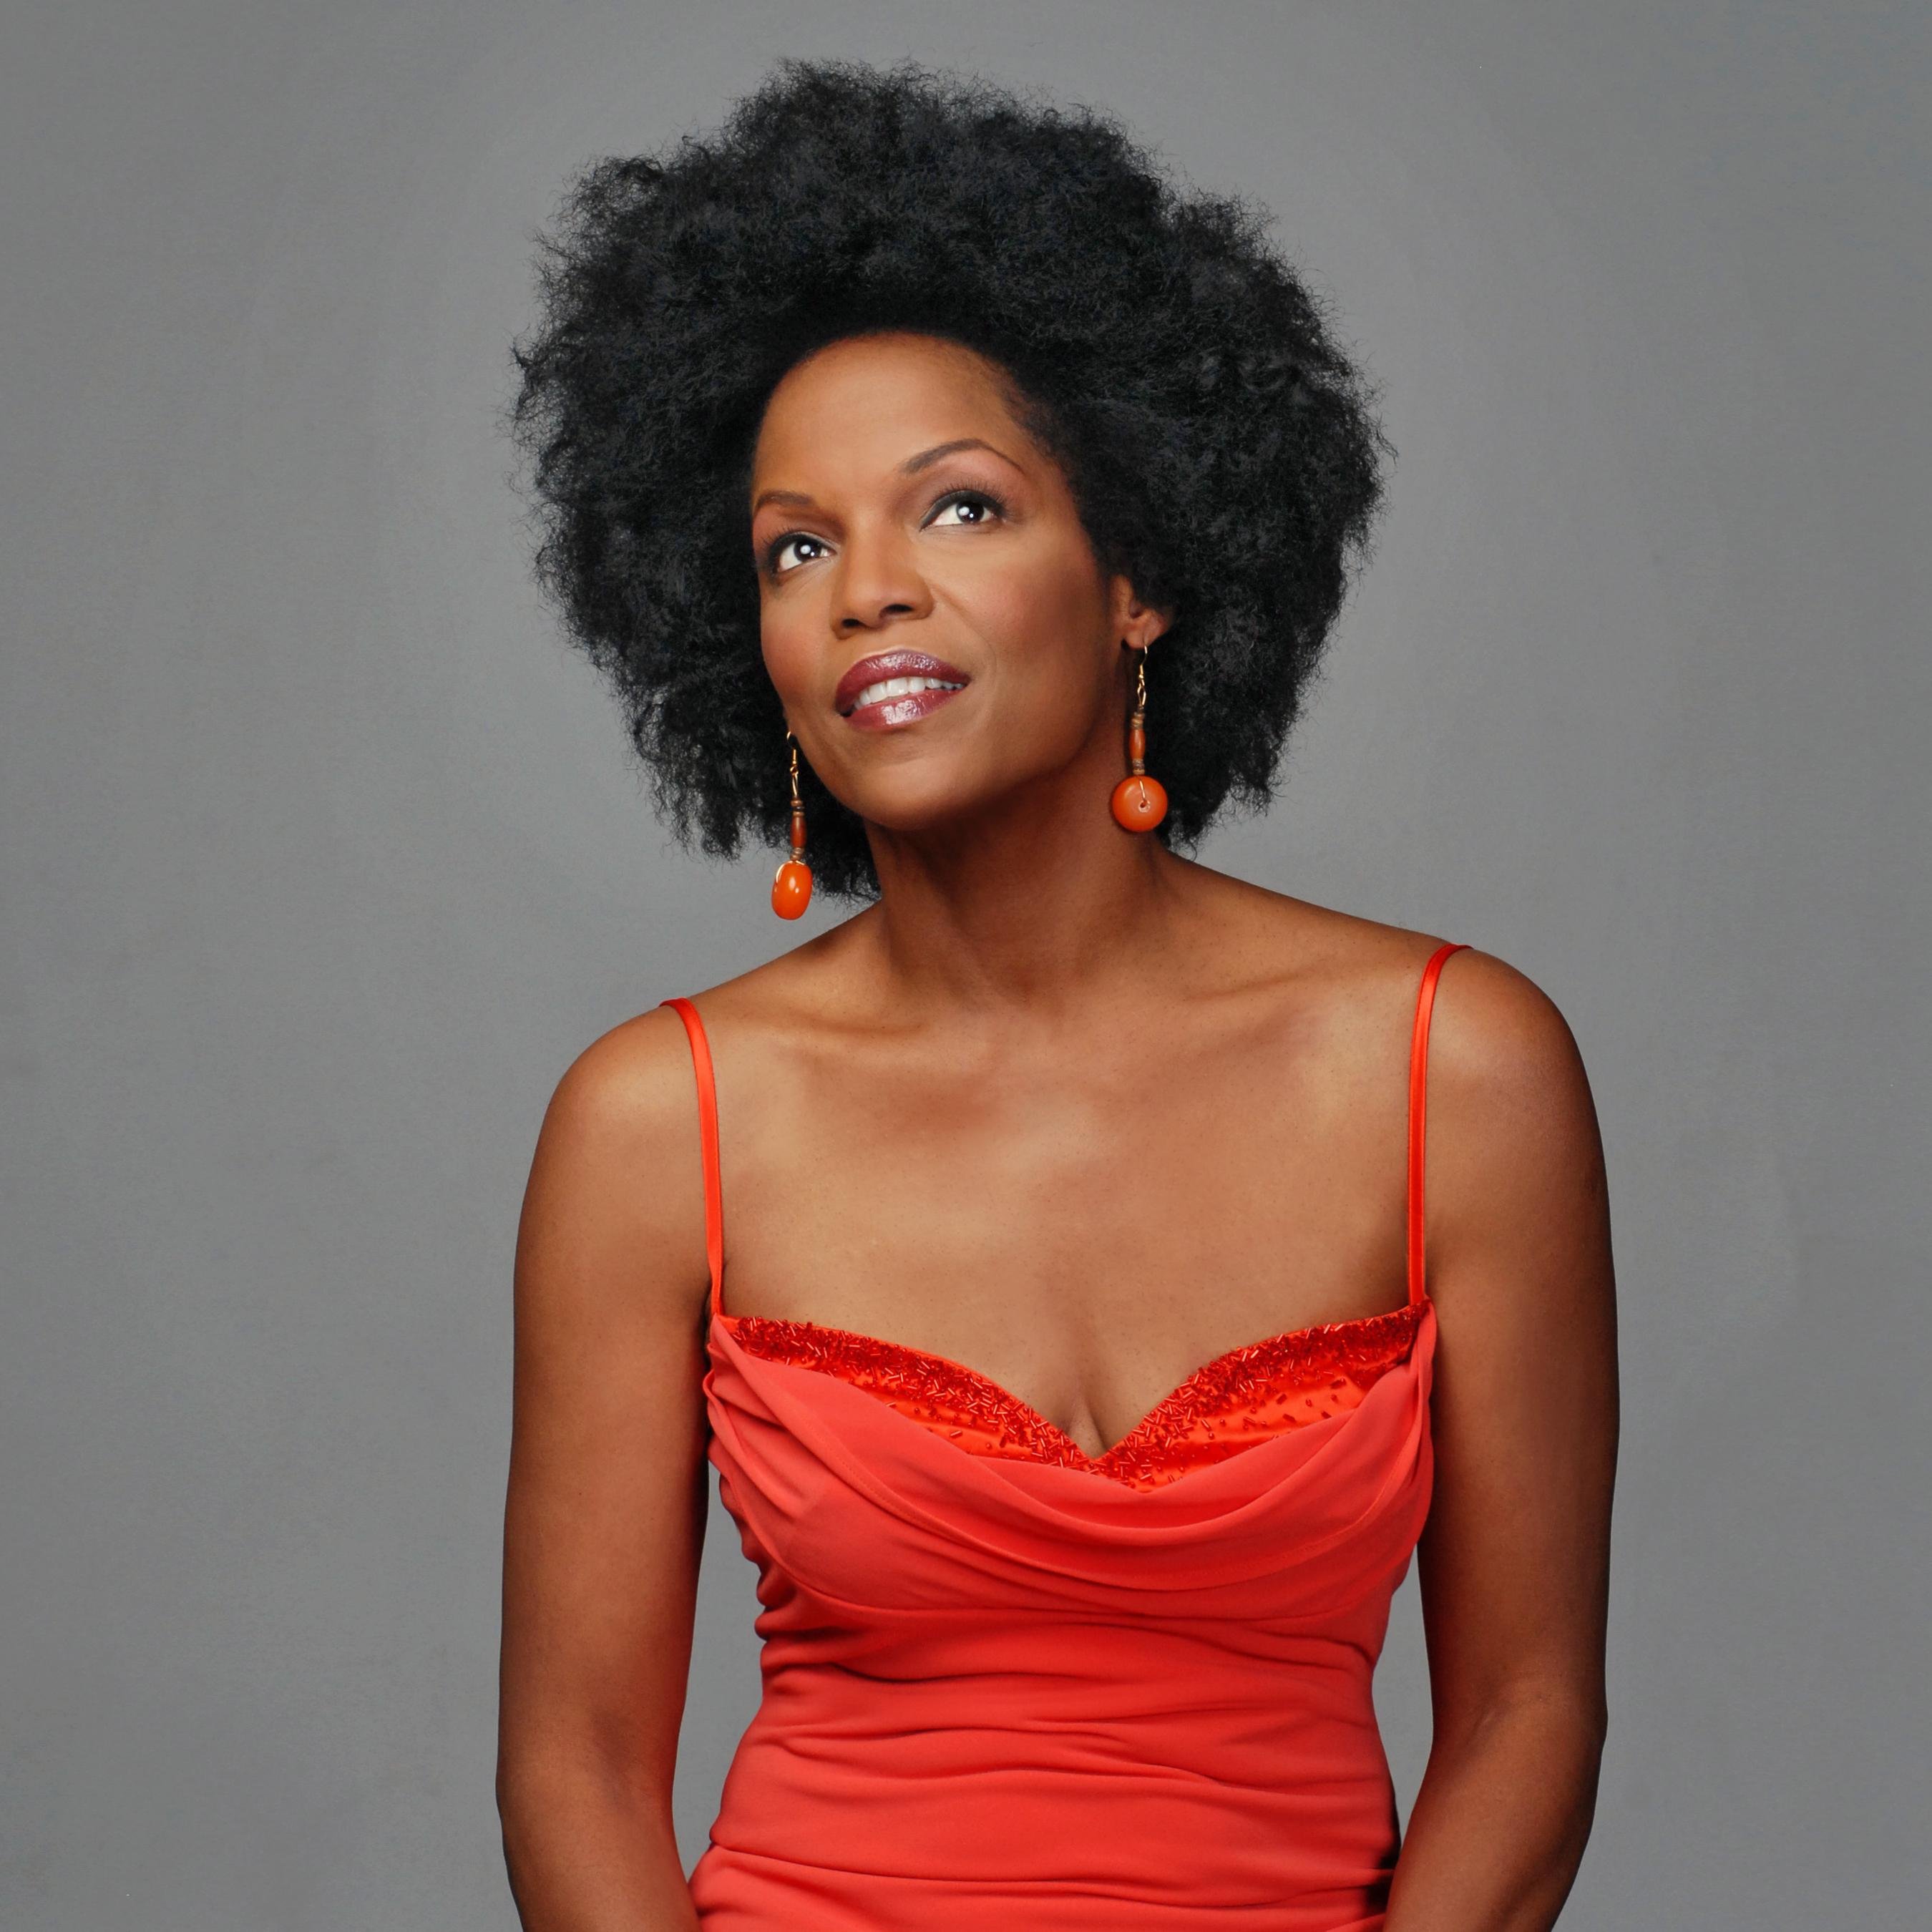 Official Twitter account for world-renowned jazz singer, six-time GRAMMY® Award-nominee and producer Nnenna Freelon. Welcome!